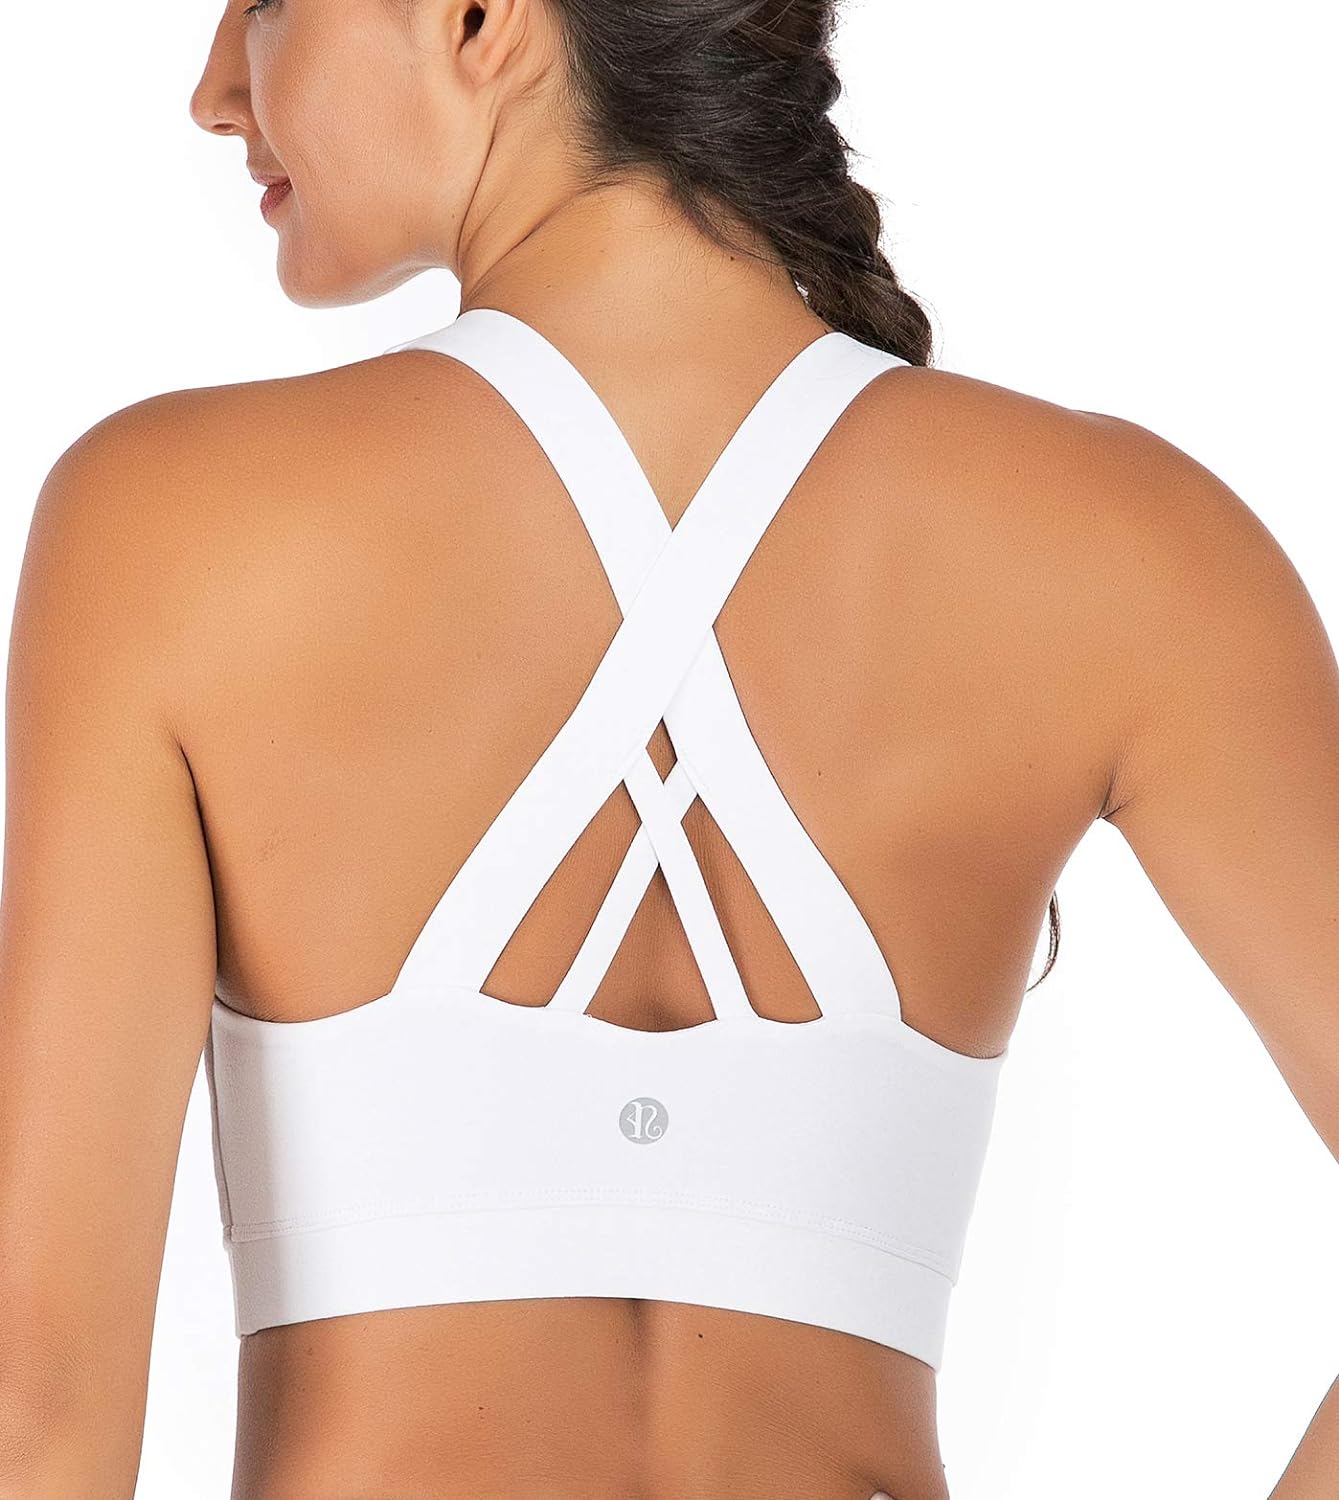 Best Sports Bra: Top Picks for Comfort and Support